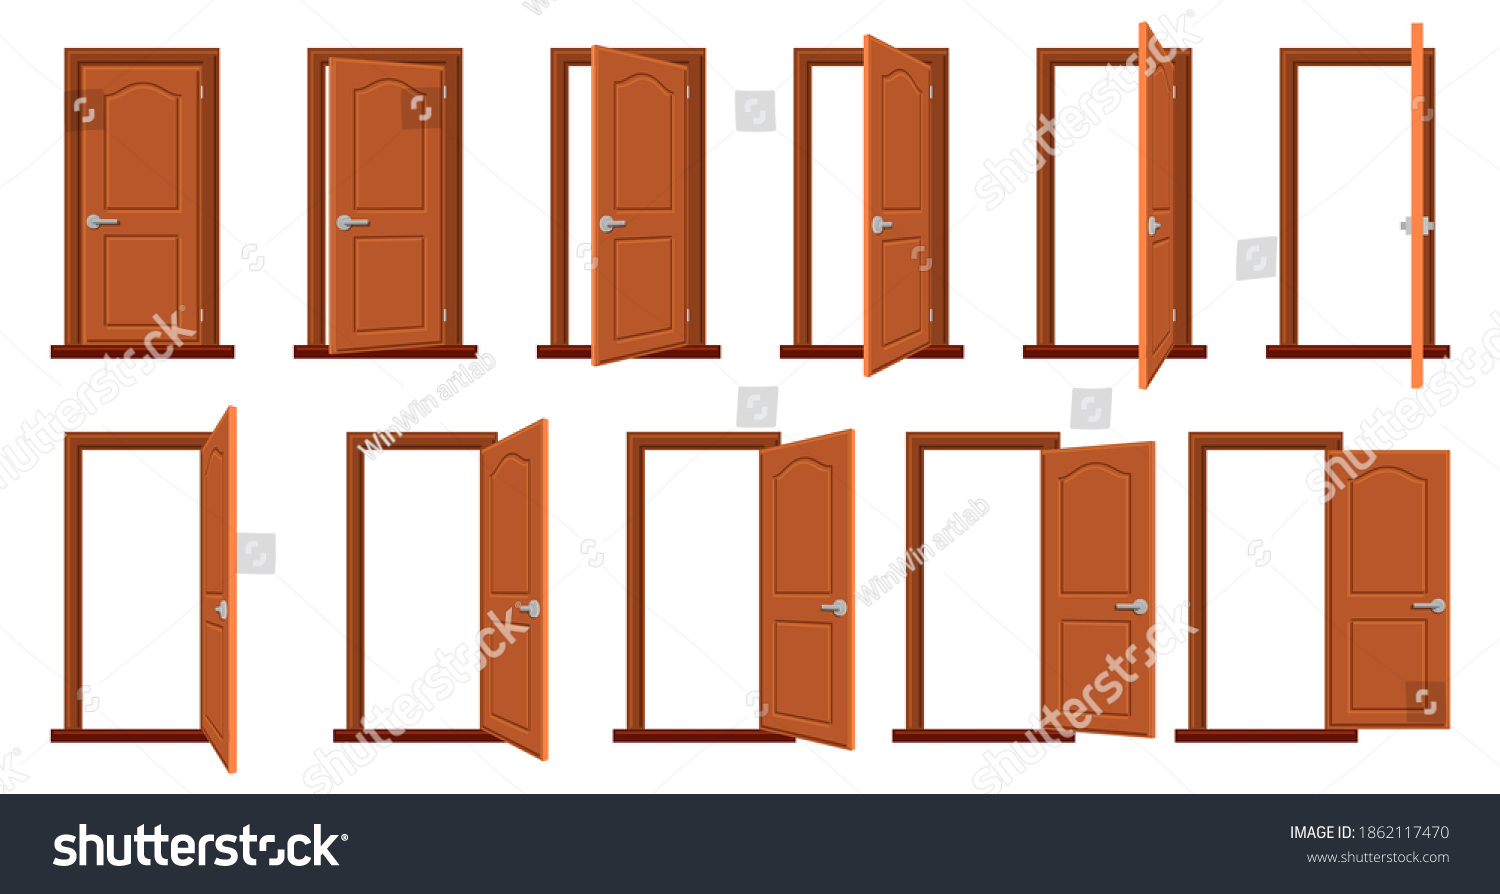 Door animation. Opened and closed wooden doors, sprite animation house entrance. Wood door in different position isolated vector illustration set. House facade or room entry isolated collection #1862117470